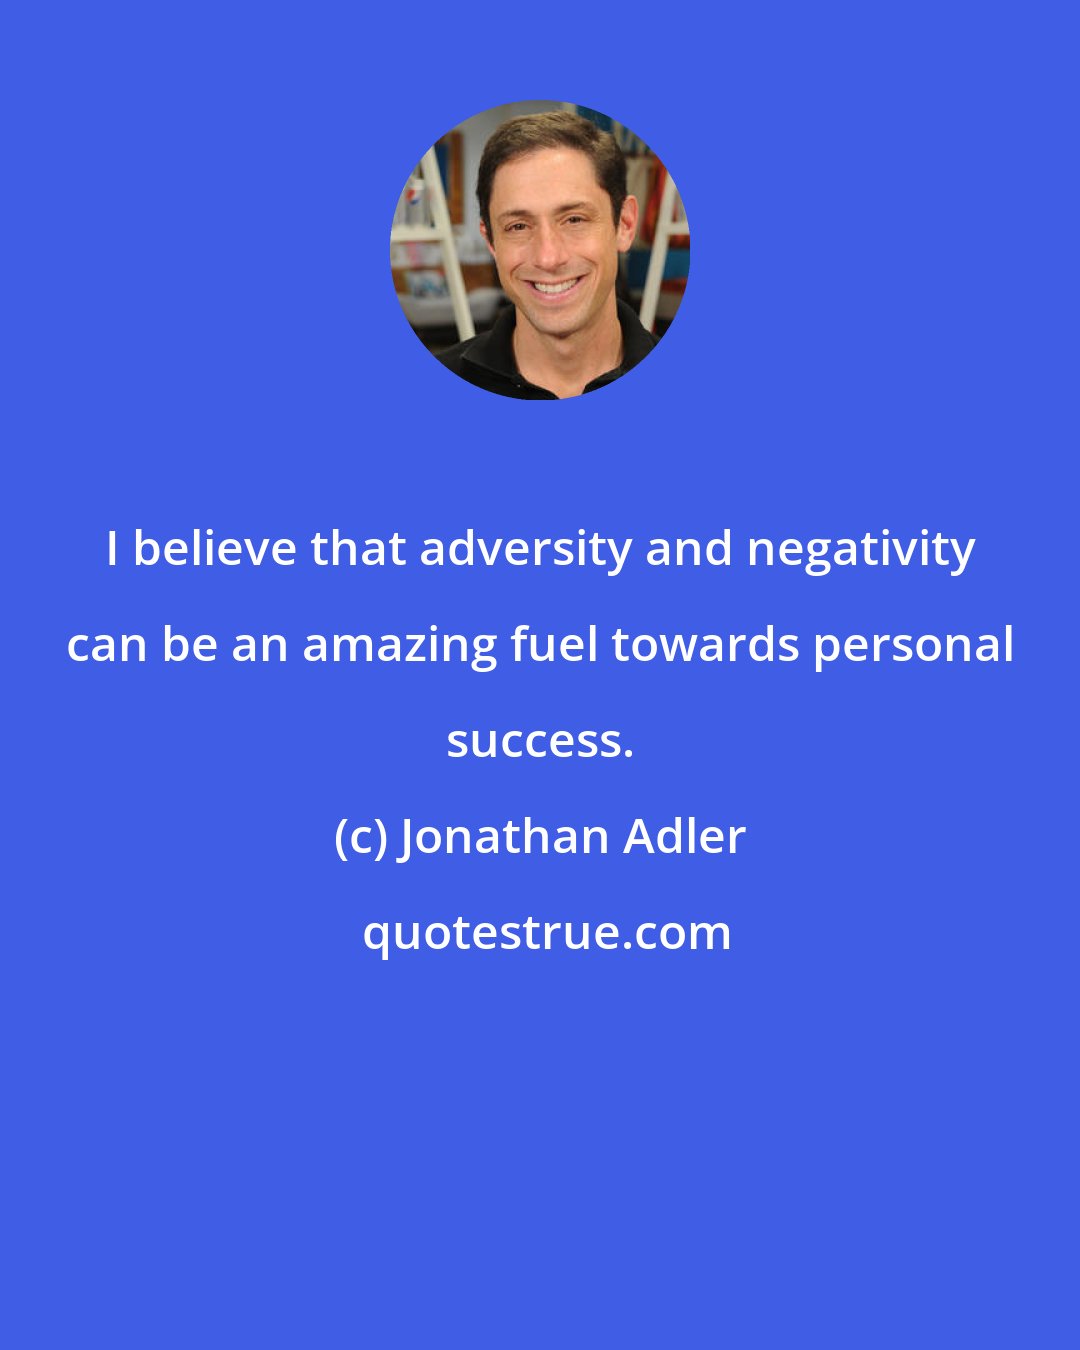 Jonathan Adler: I believe that adversity and negativity can be an amazing fuel towards personal success.